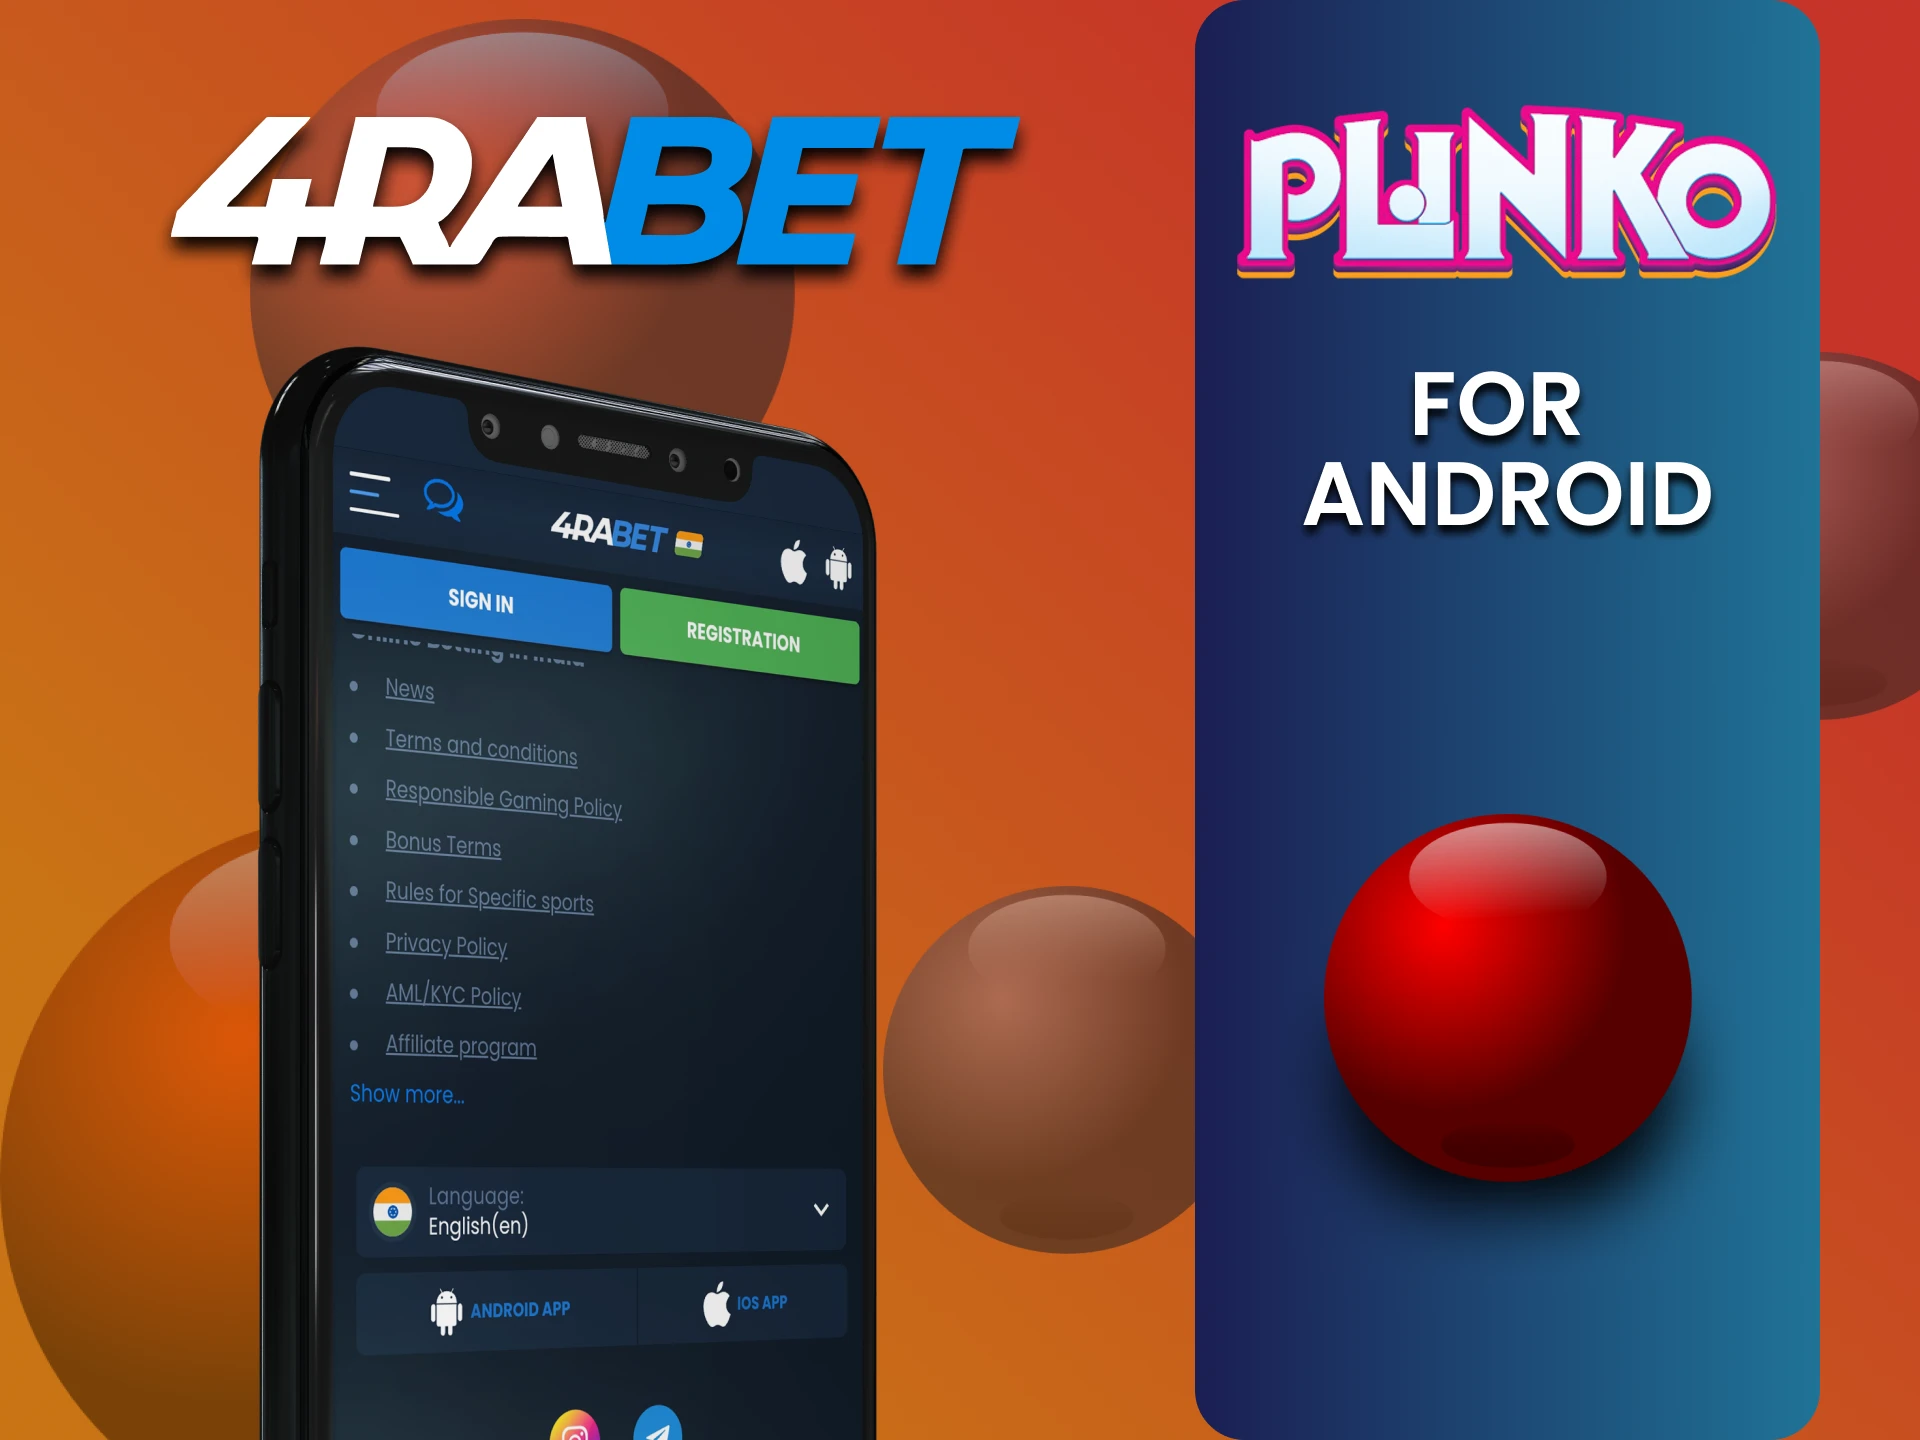 Download the 4rabet app for Android to play Plinko.